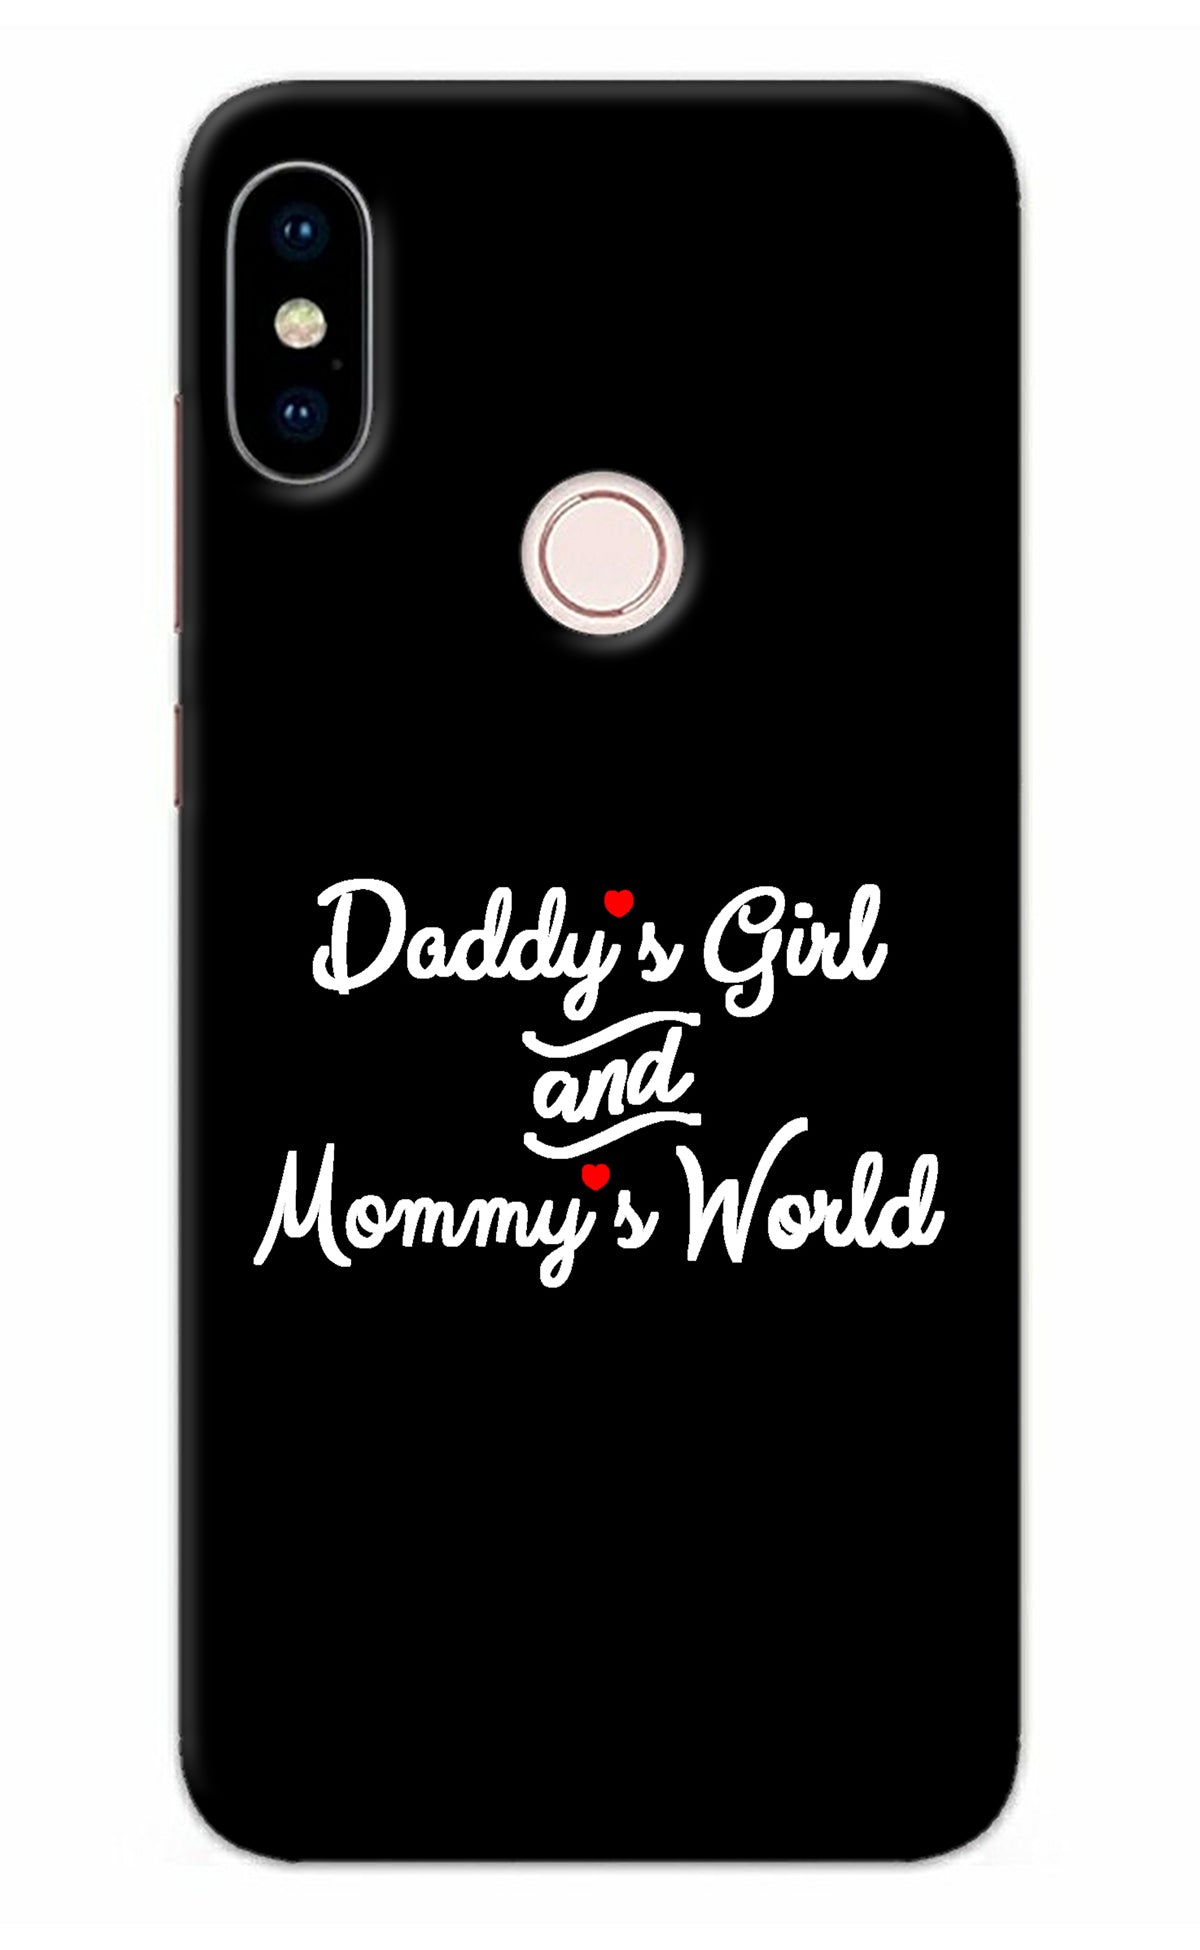 Daddy's Girl and Mommy's World Redmi Note 5 Pro Back Cover